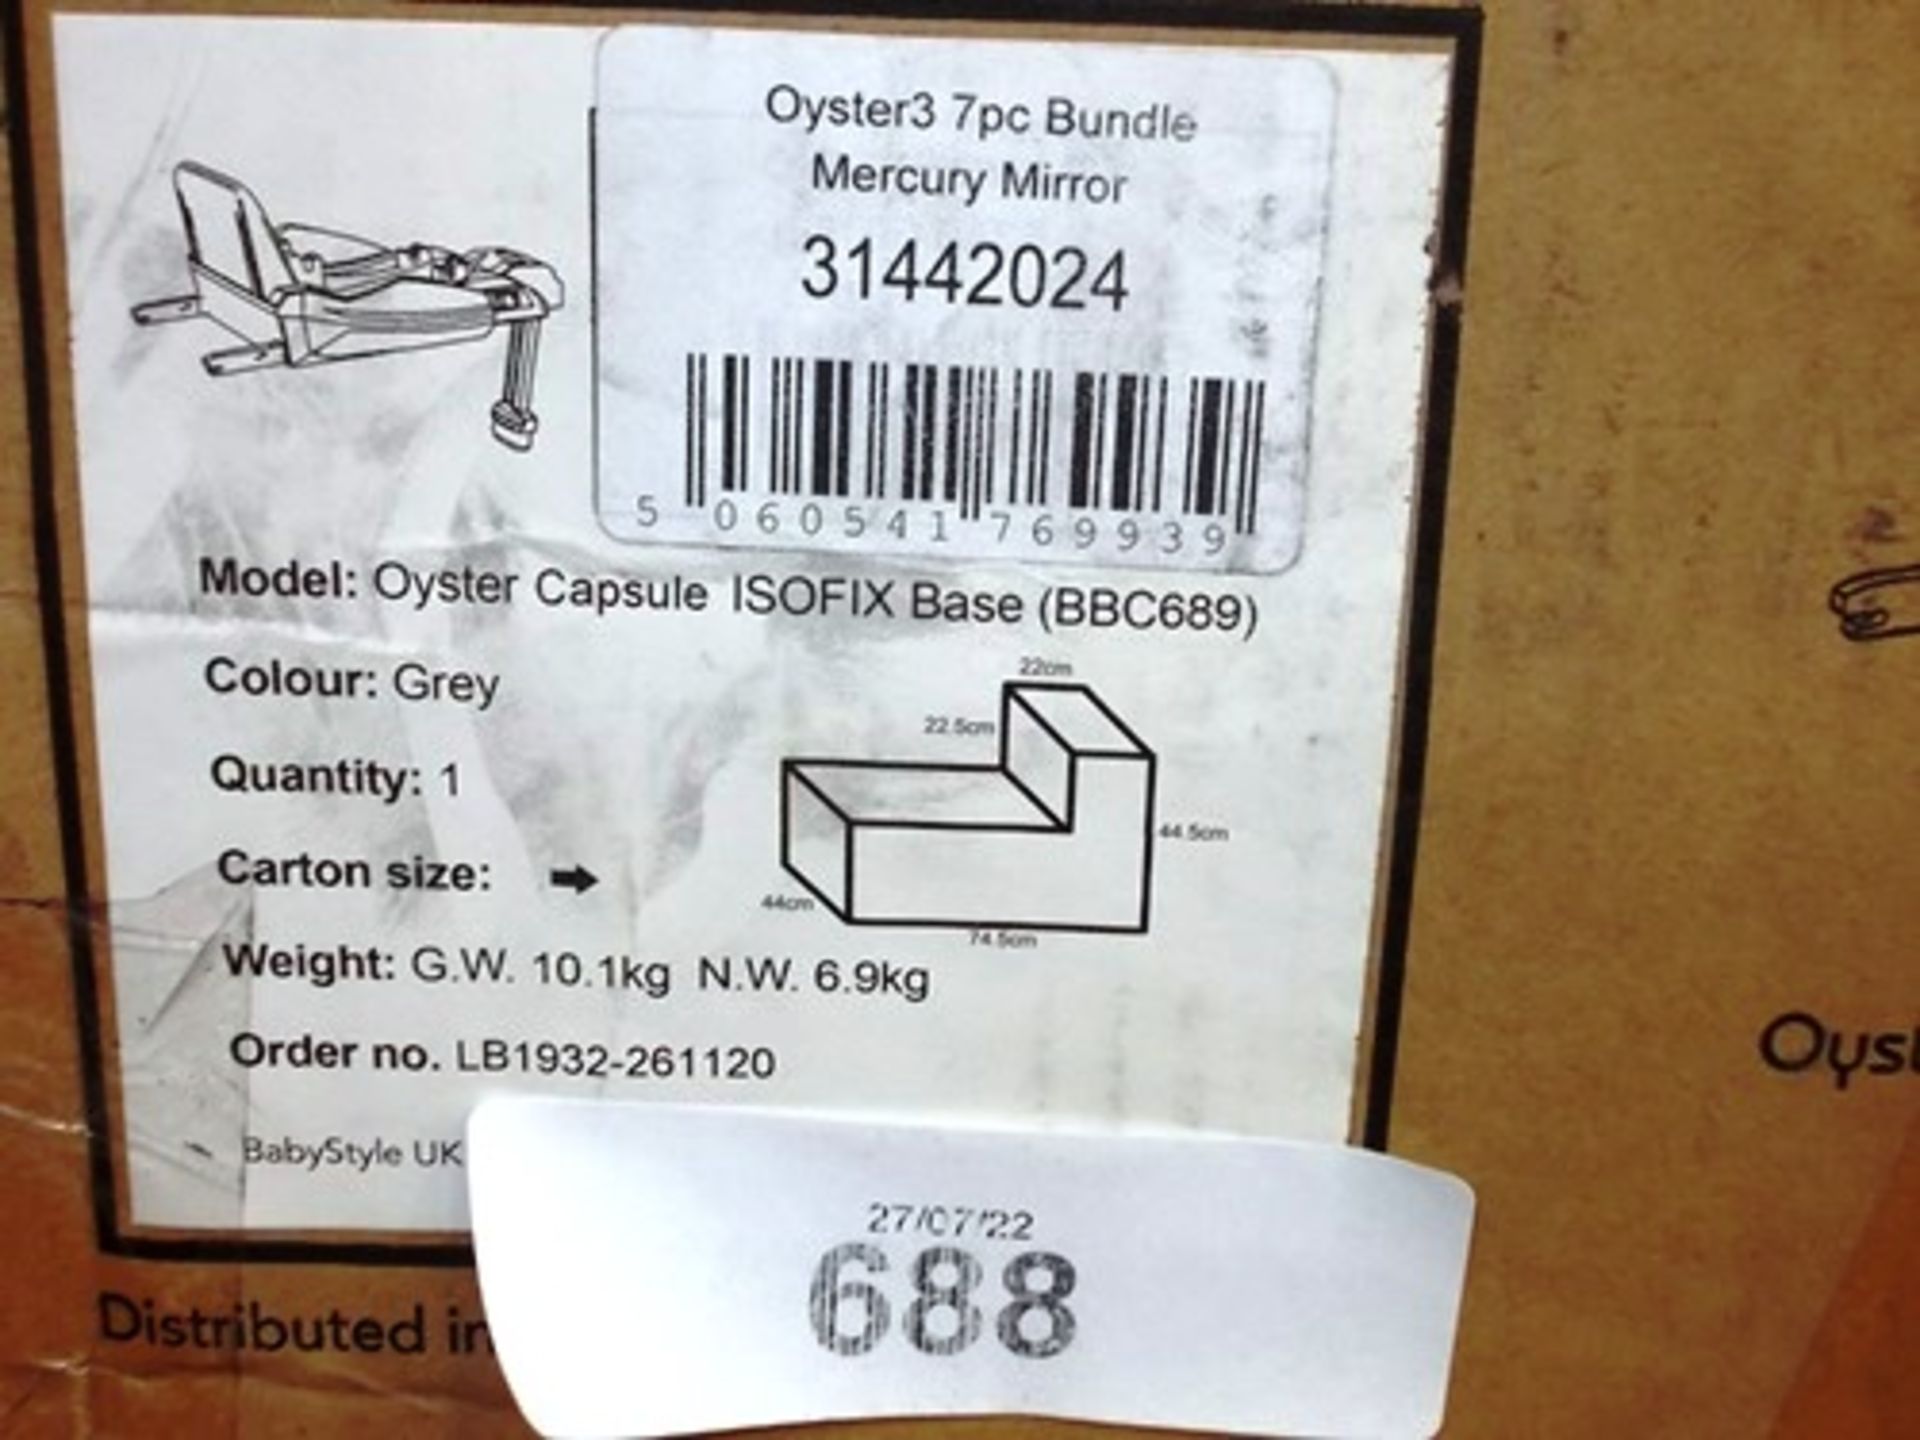 1 x Oyster Capsule grey Isofix base, code LB1932-261120 - New in tatty box (GS36B)